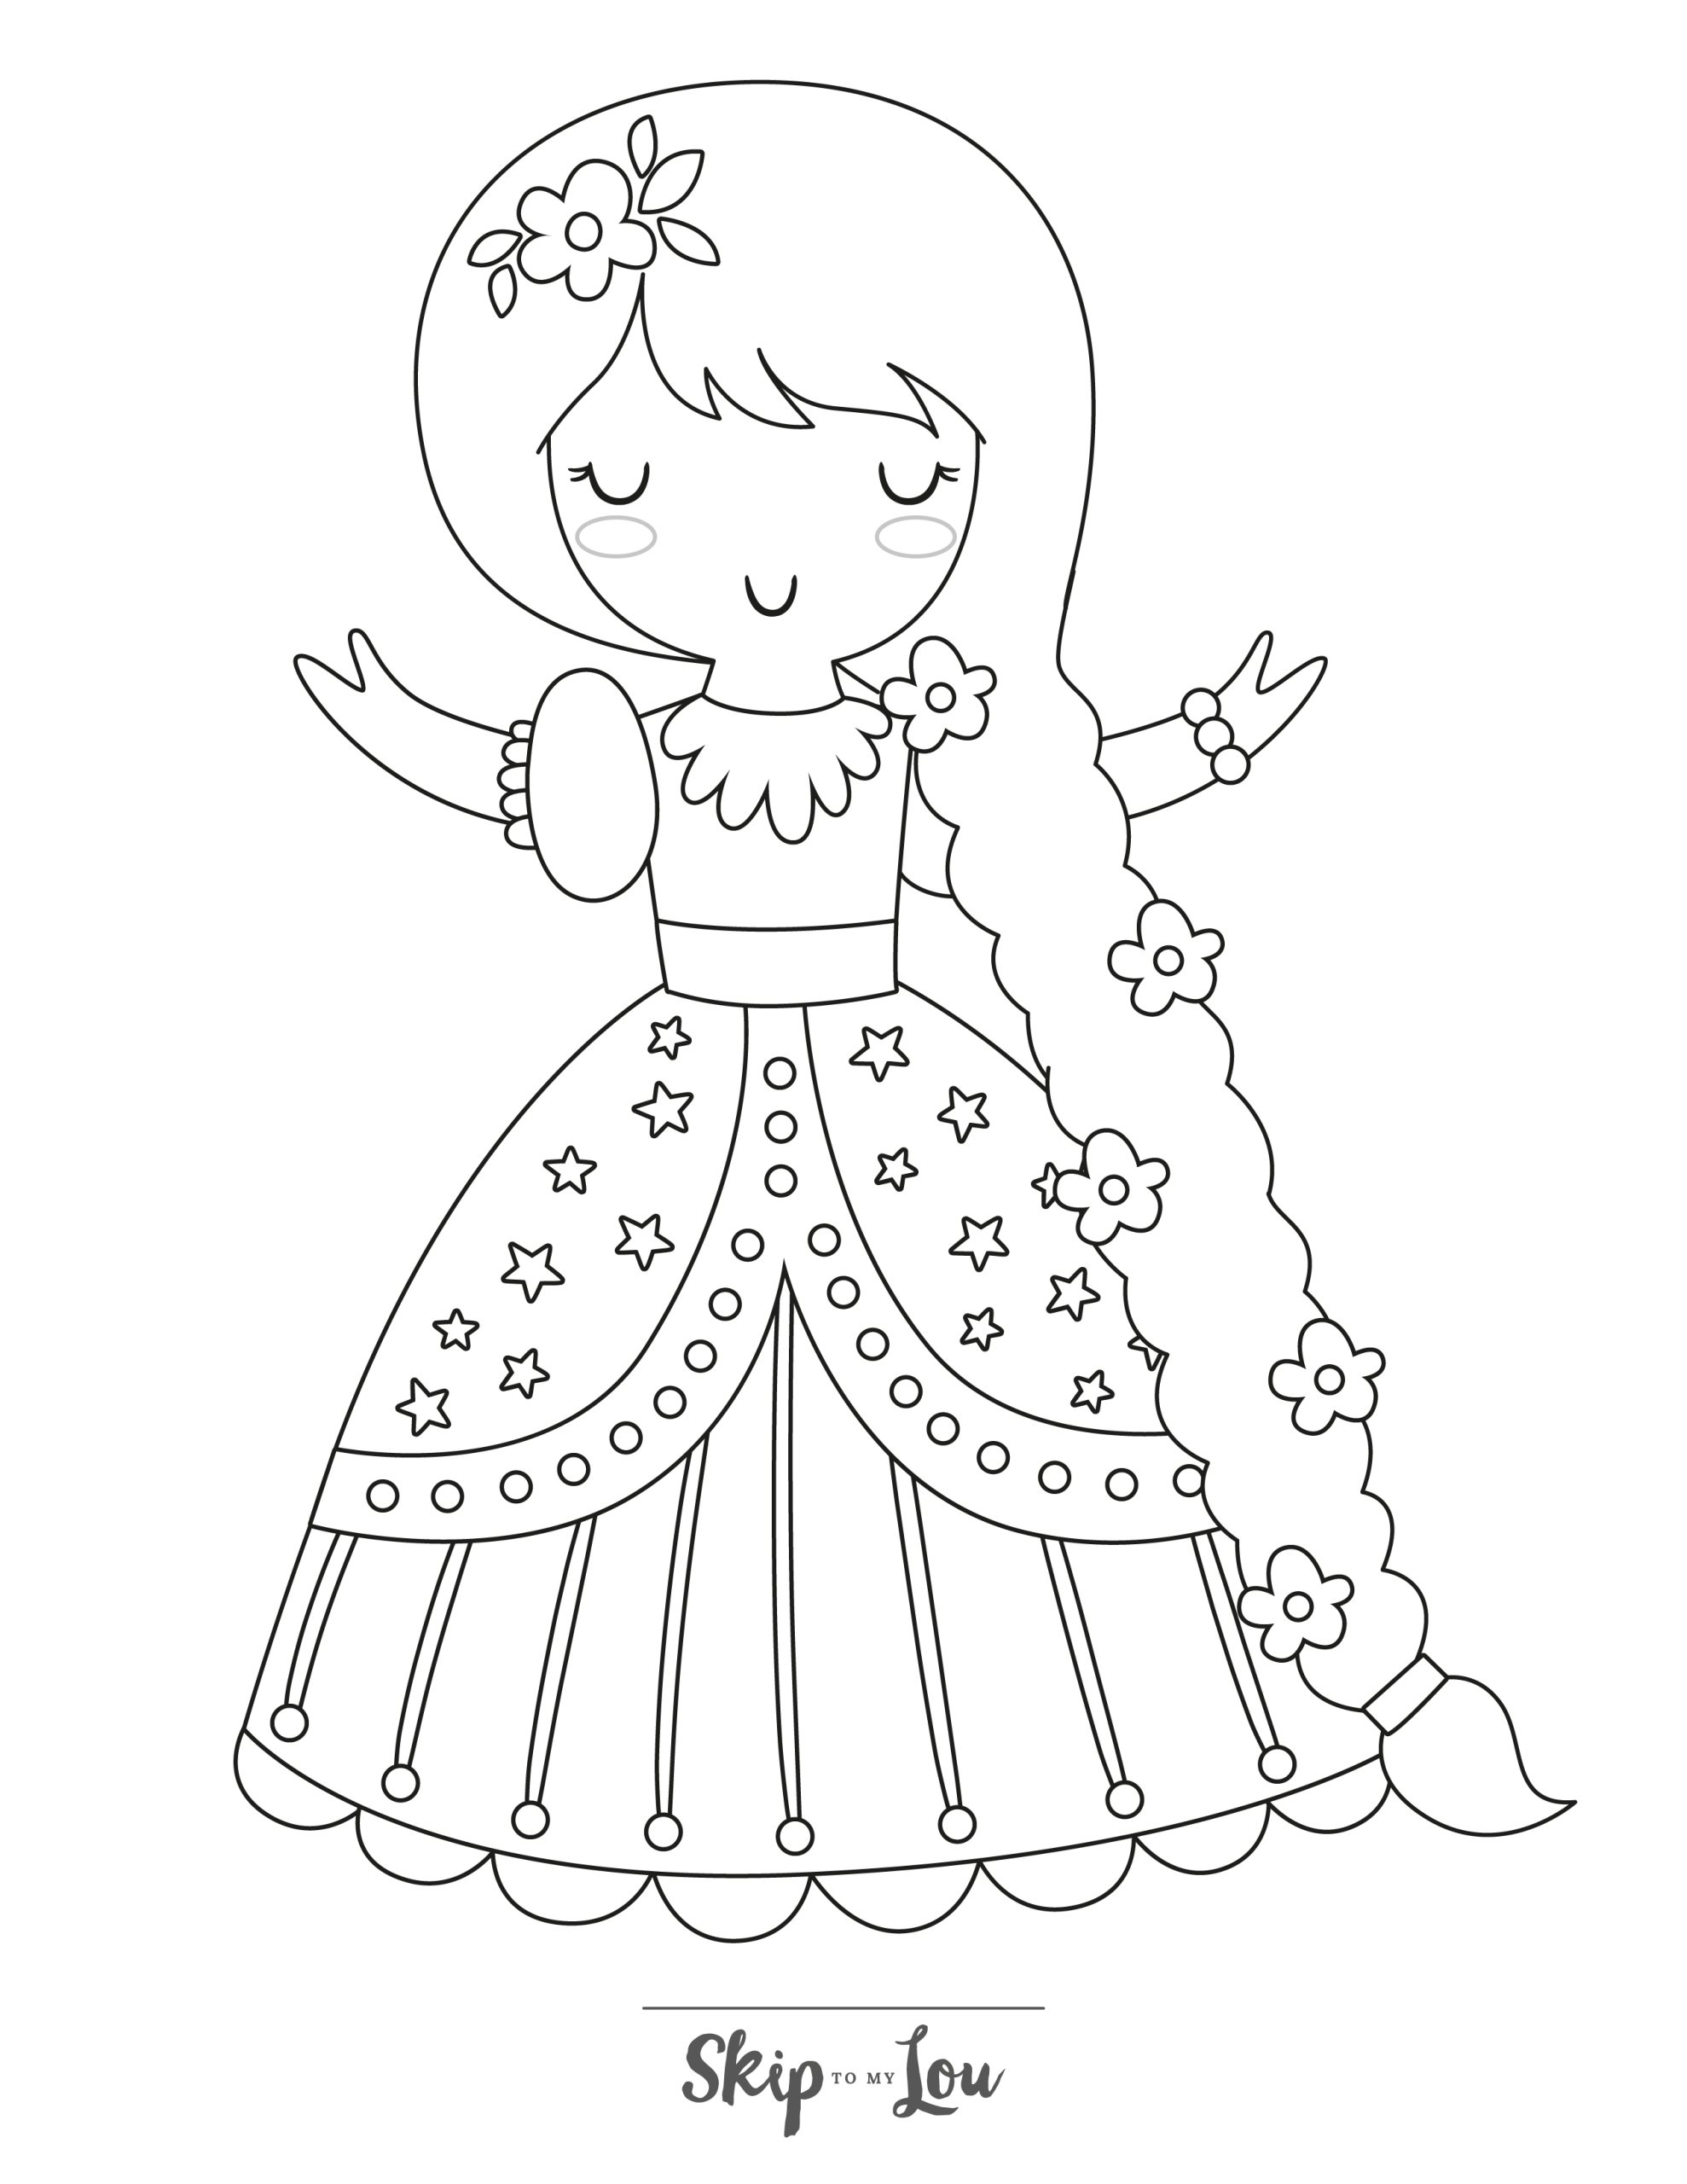 Rapunzel Coloring Page 12 - Detailed line drawing of Rapunzel wearing a dress